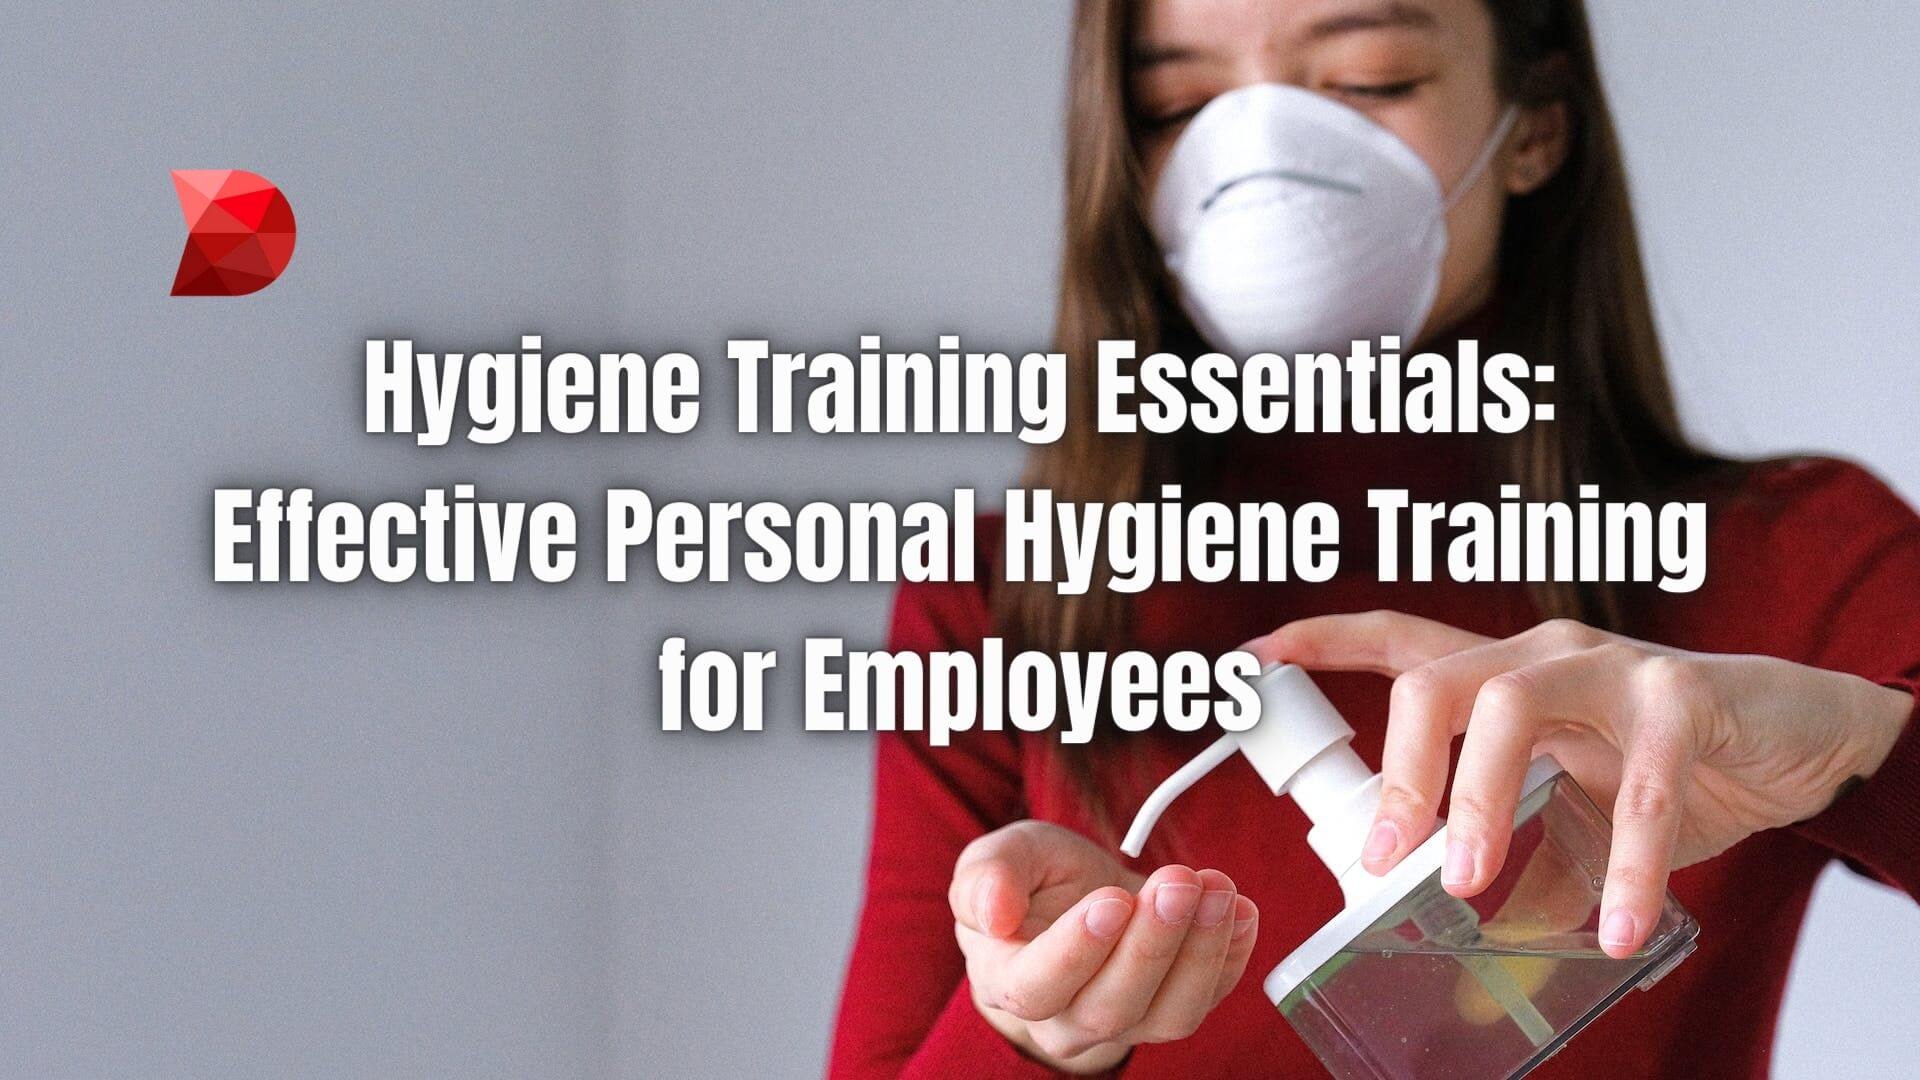 Discover the ultimate guide to employee hygiene training. Elevate cleanliness standards at work for a safer, healthier environment.